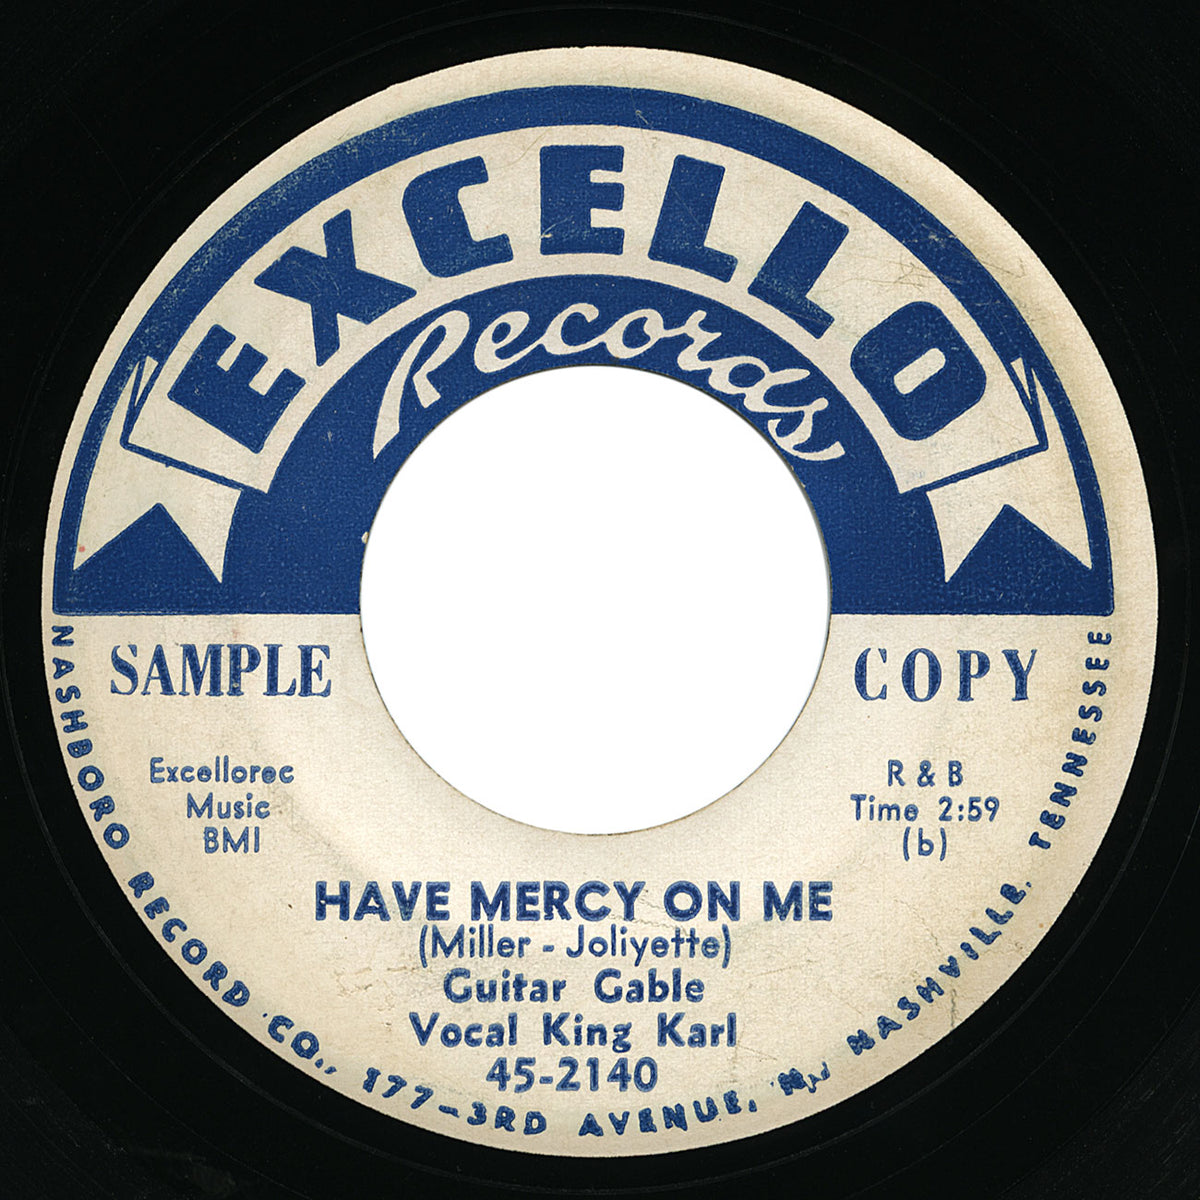 Guitar Gable vocal King Karl – Have Mercy On Me – Excello